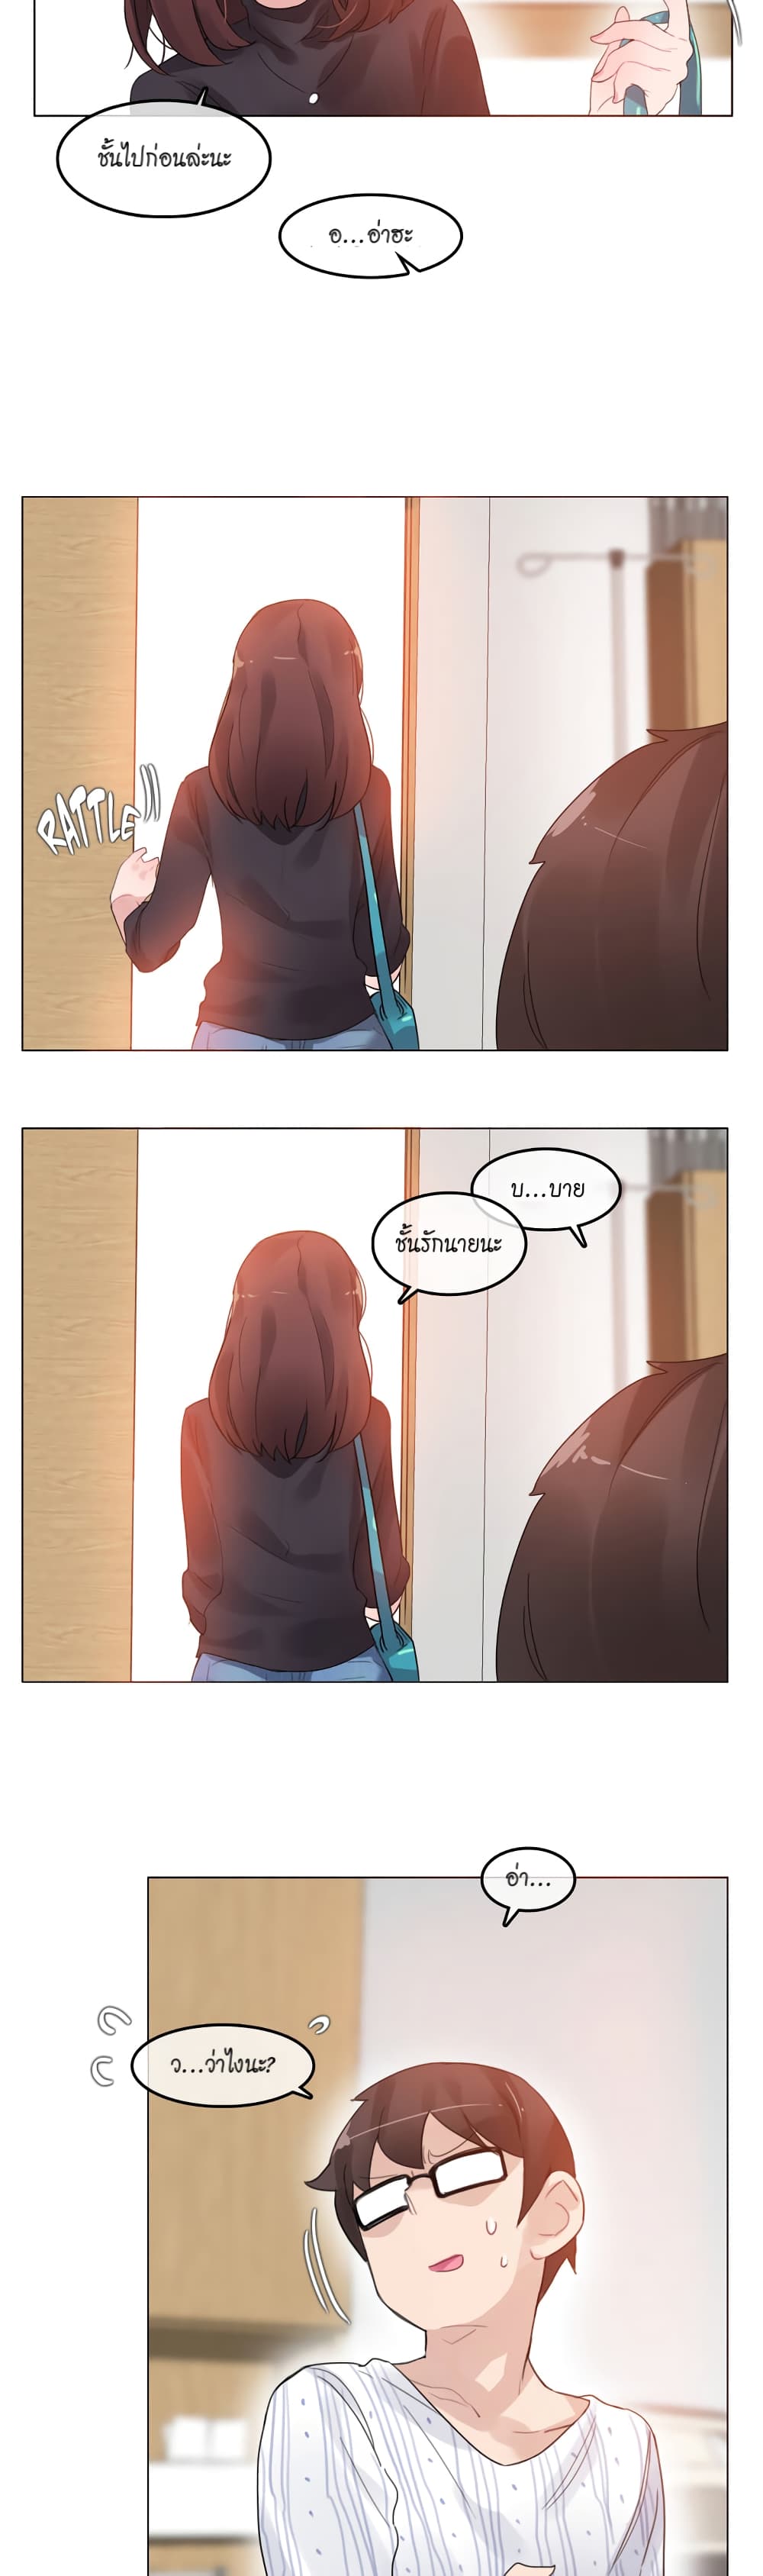 A Pervert's Daily Life 51-51